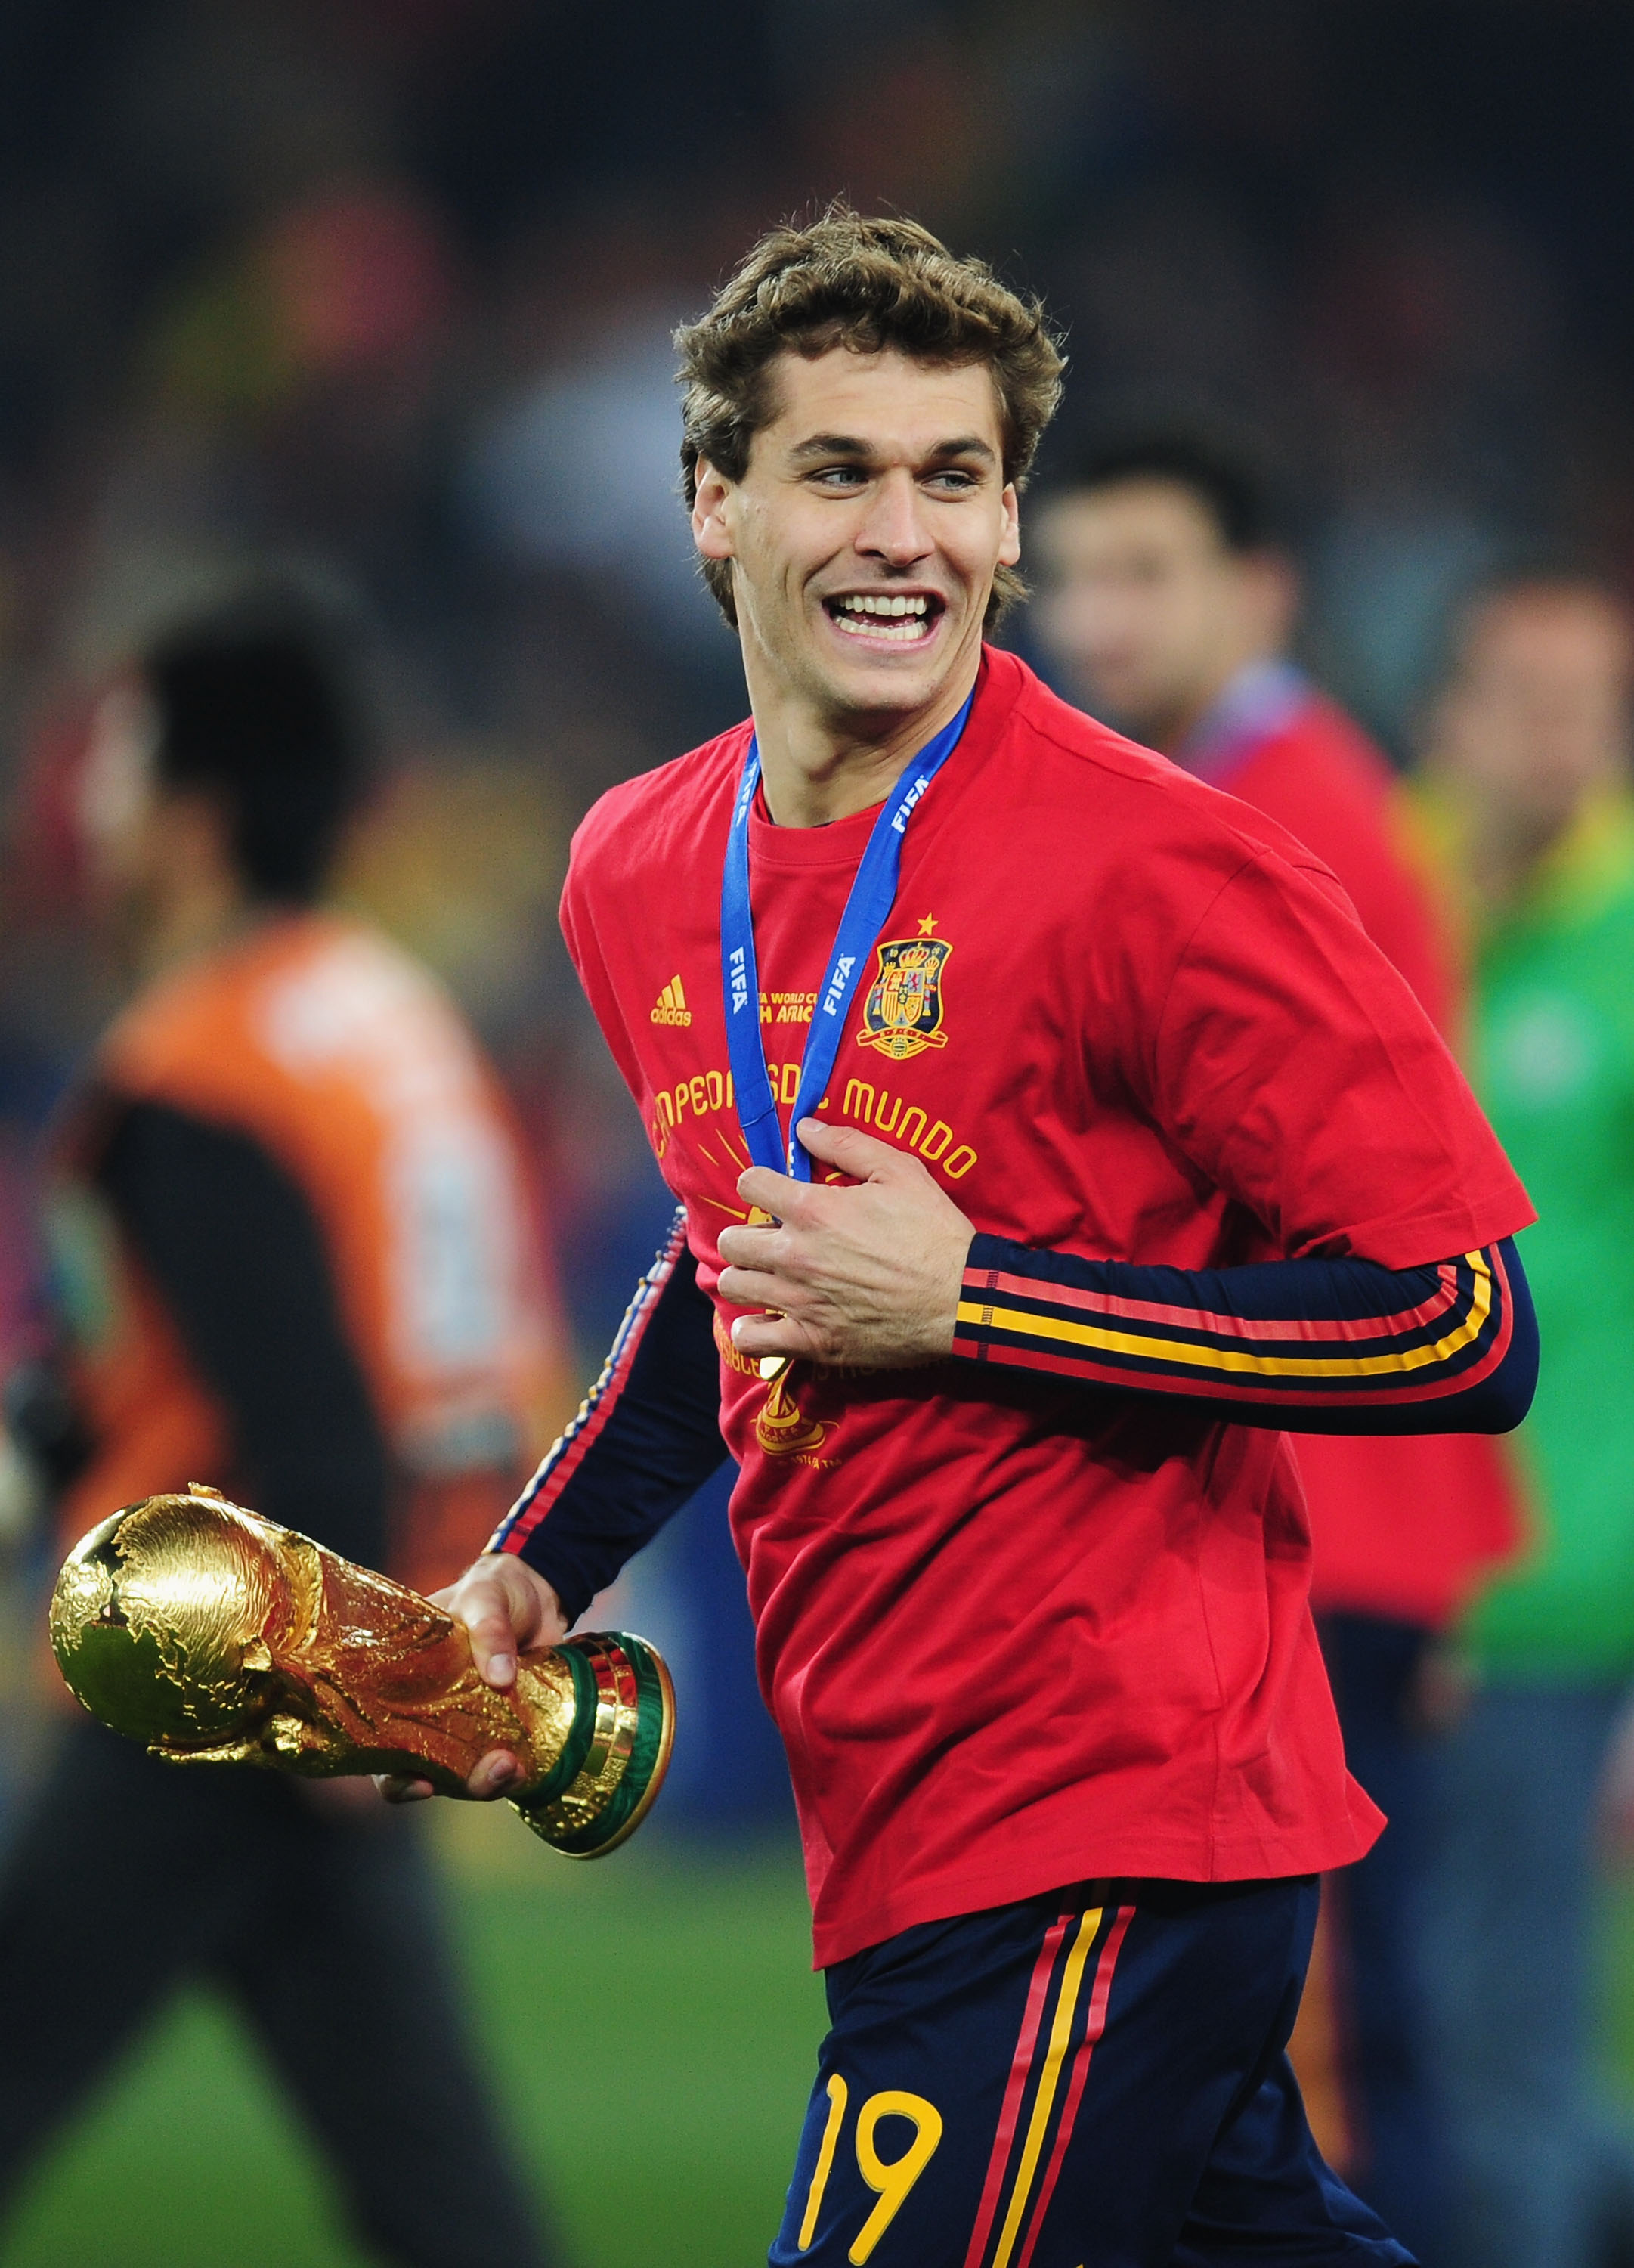 JOHANNESBURG, SOUTH AFRICA - JULY 11:  Fernando Llorente of Spain carries the World Cup trophy as the Spain team celebrate victory following the 2010 FIFA World Cup South Africa Final match between Netherlands and Spain at Soccer City Stadium on July 11, 